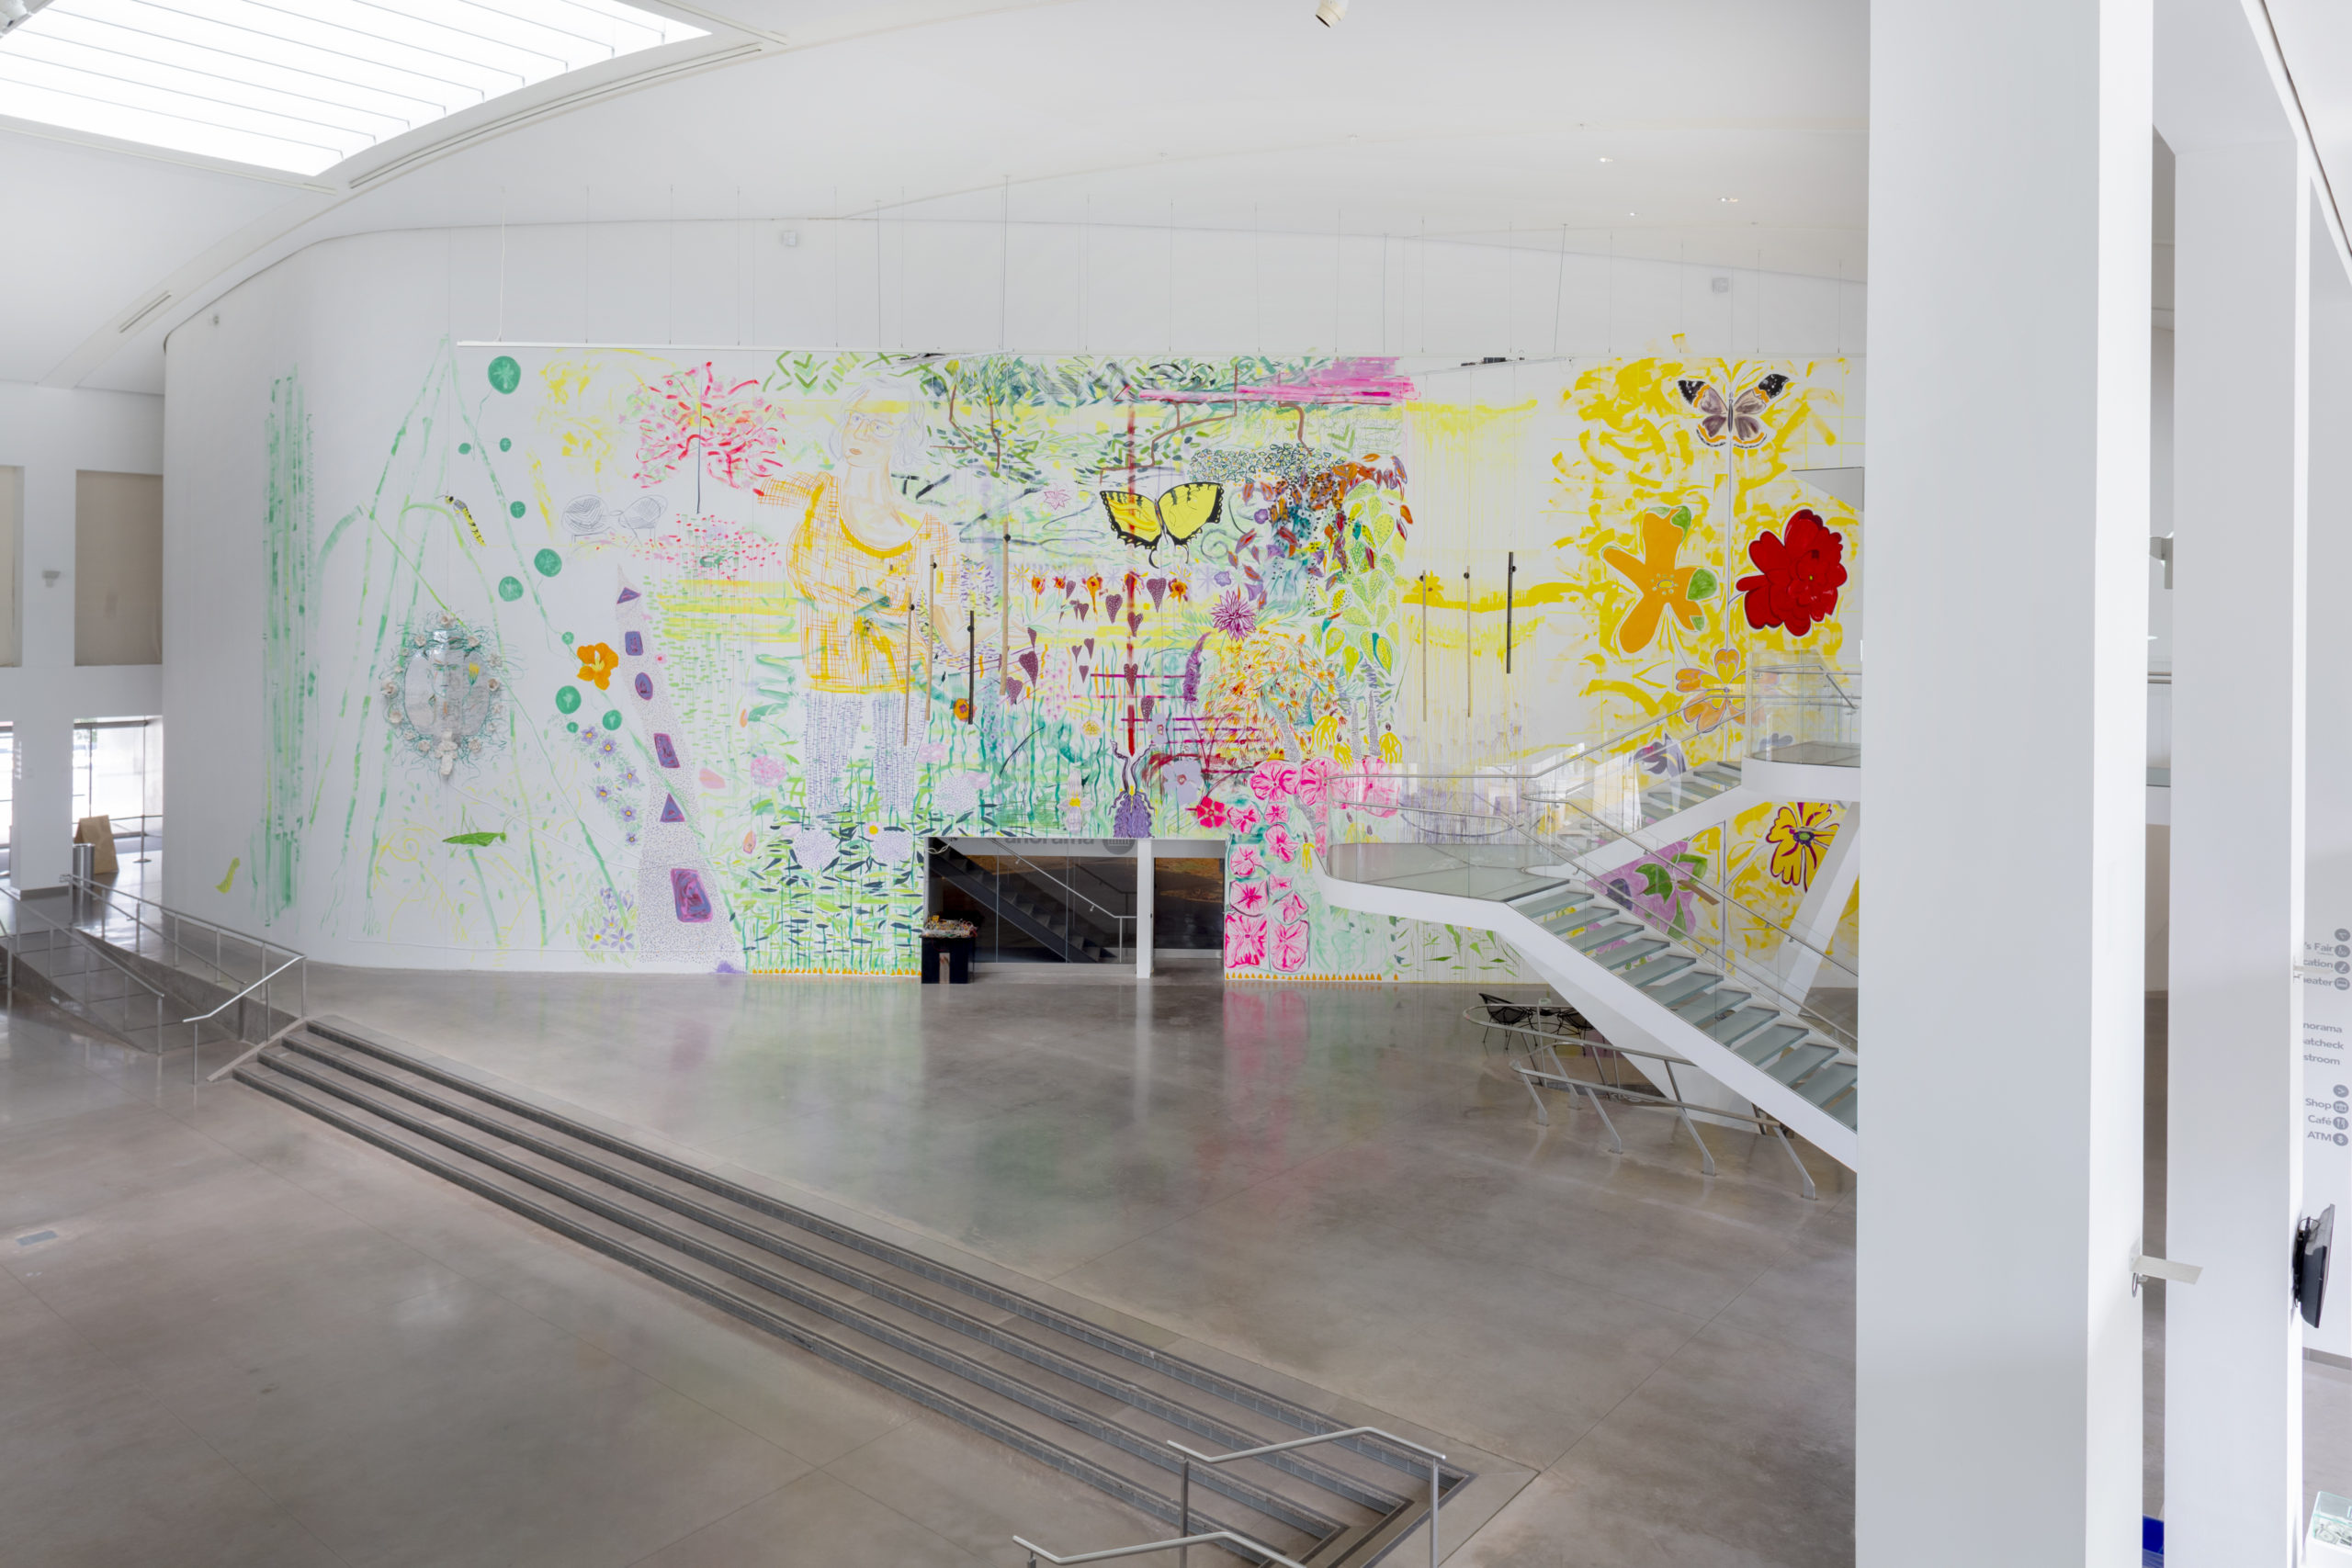 A two-story mural, of abstracted garden patterns and imagery in an empty exhibition space. Descending from the top right corner is a twisting flight of stairs. The first two-thirds of the mural, starting from the left, is mostly green and depicts a person standing in a field. As you move towards the right you see flowers in warm colors and a yellow butterfly. Then the green abruptly stops and a yellow scene begins with more flowers in different colors and a brown butterfly.